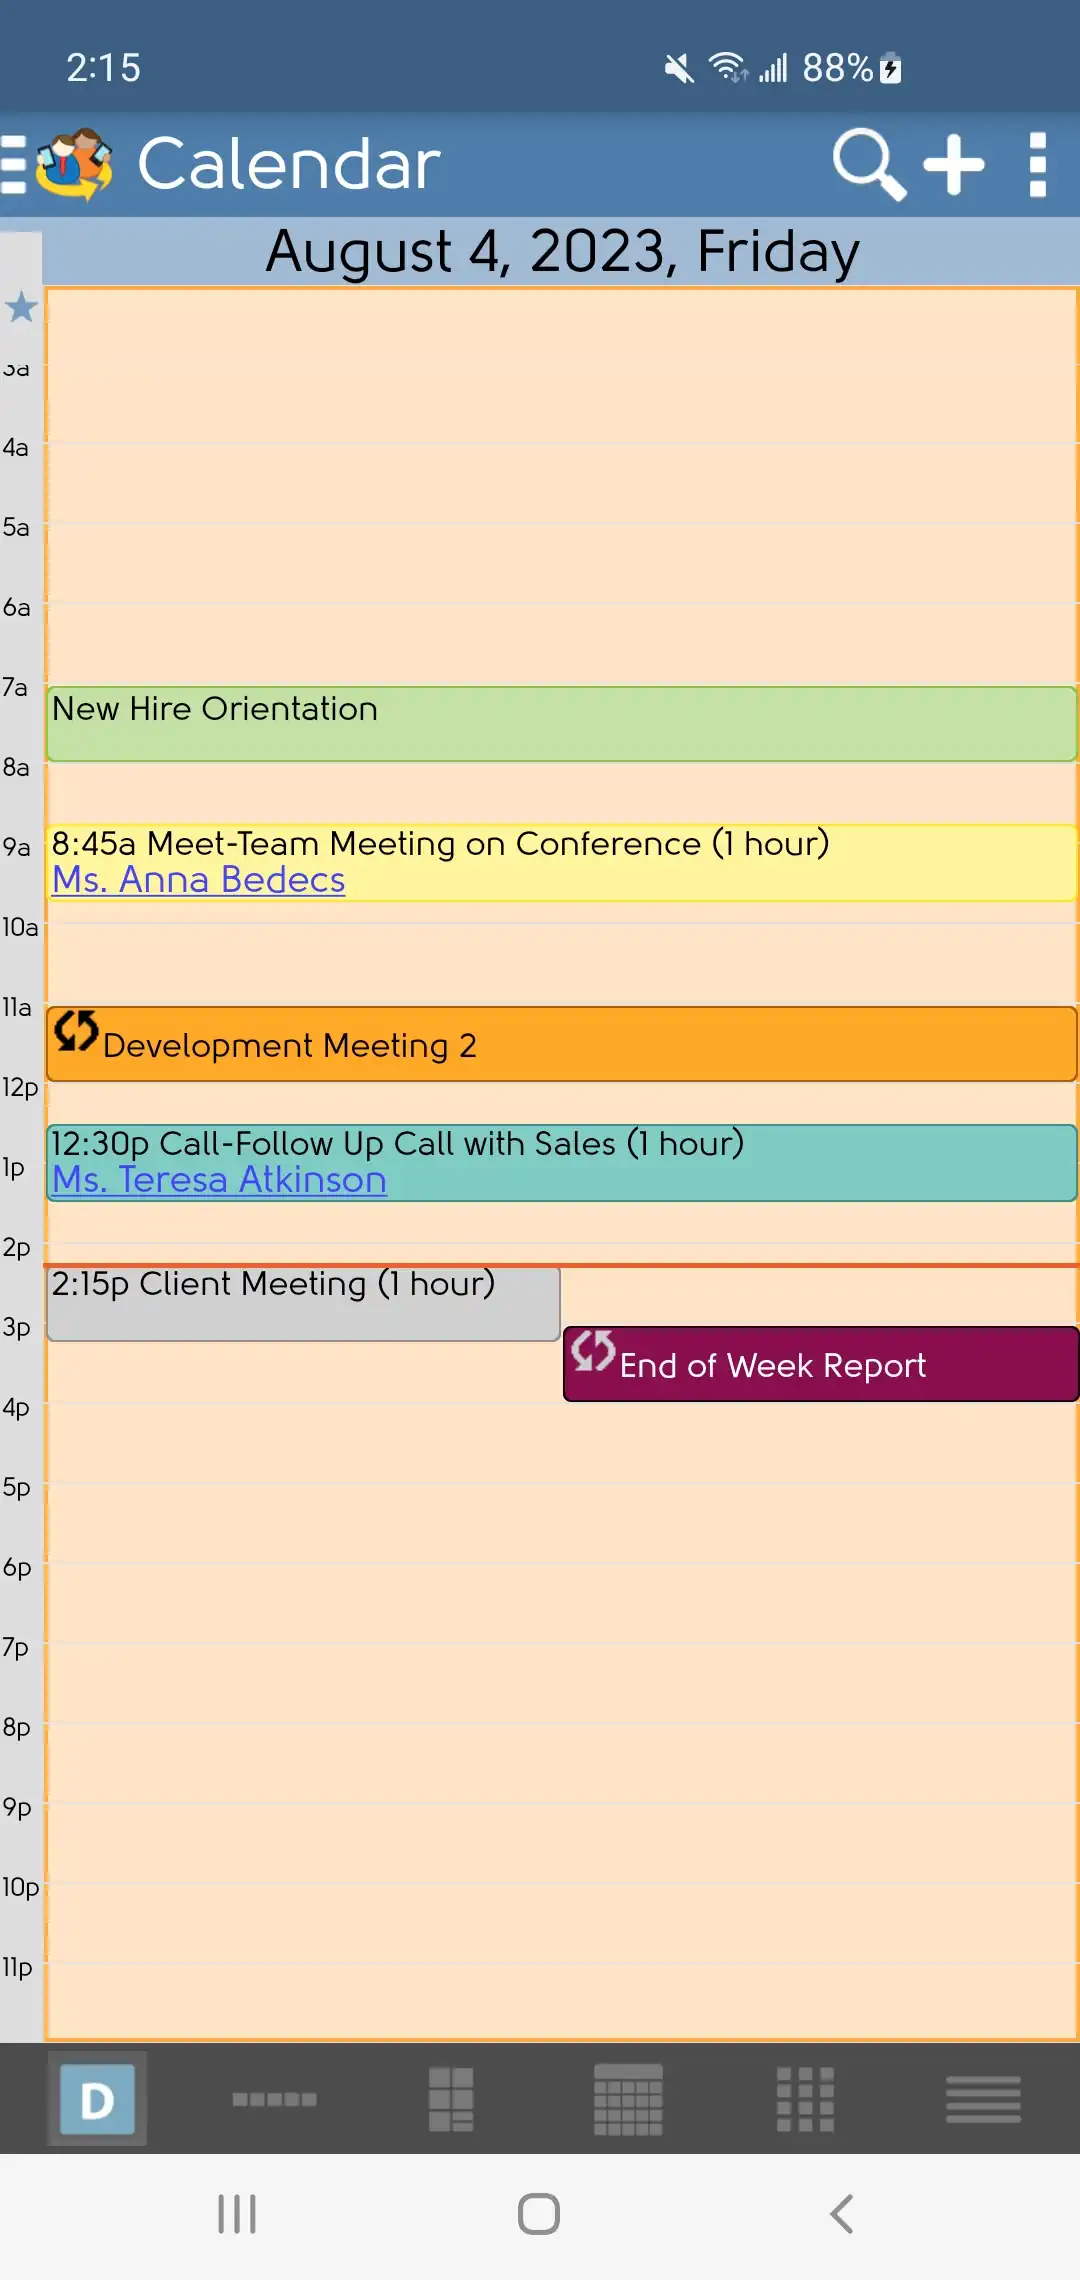 DejaOffice calendar scaled view with vertical pinch